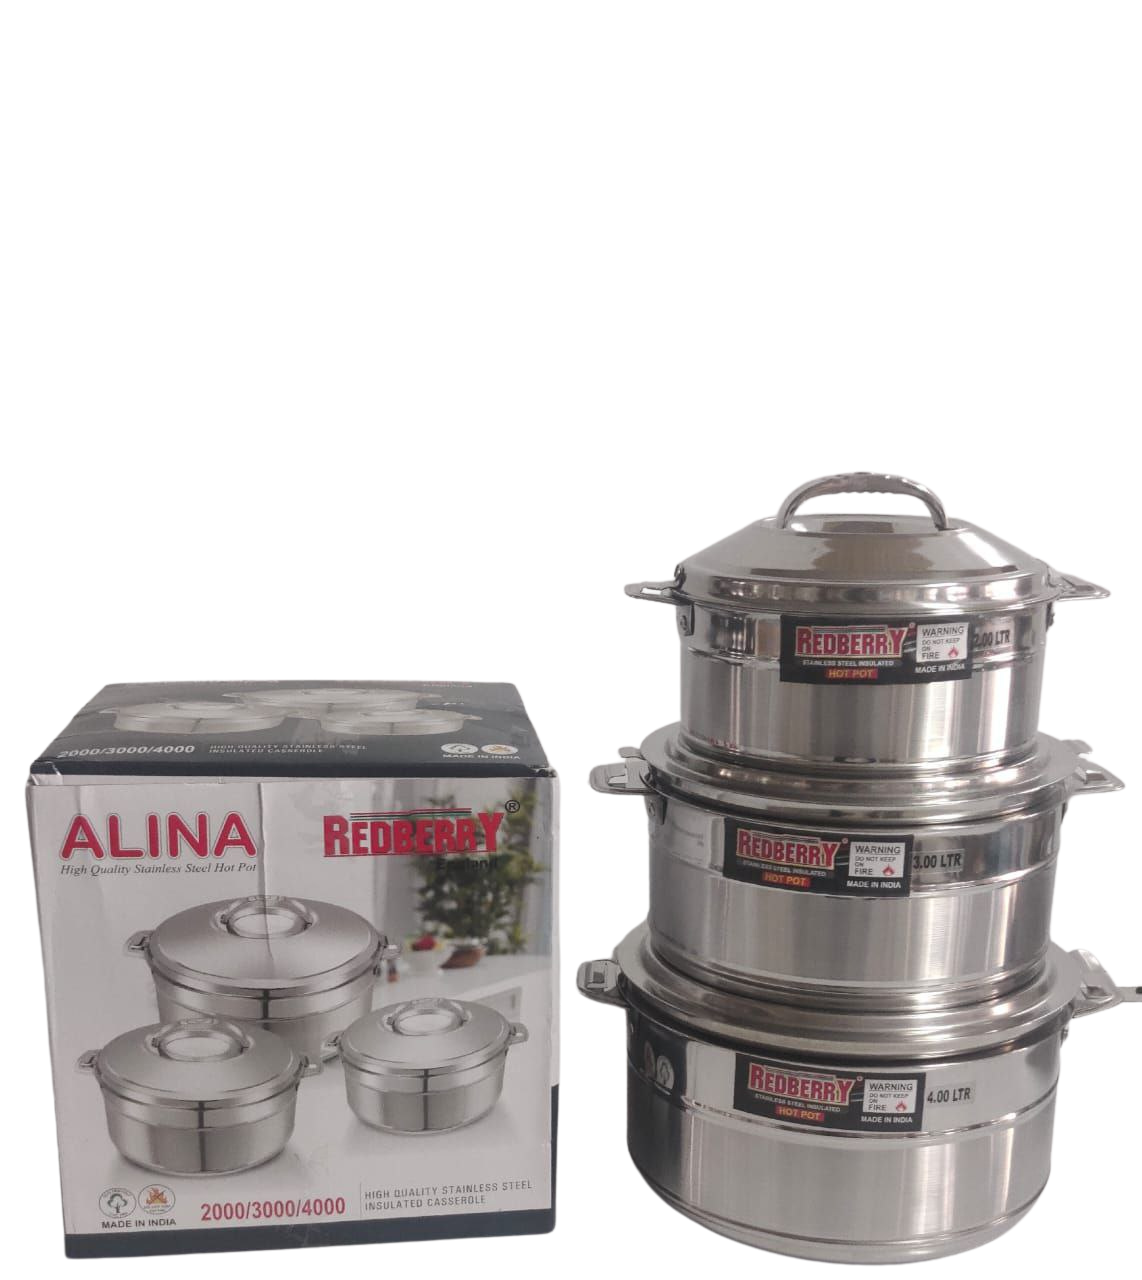 Redberry stainless Steel Hot pot 2L|3L|4L Alina Insulated Hot Pot keeps Hot